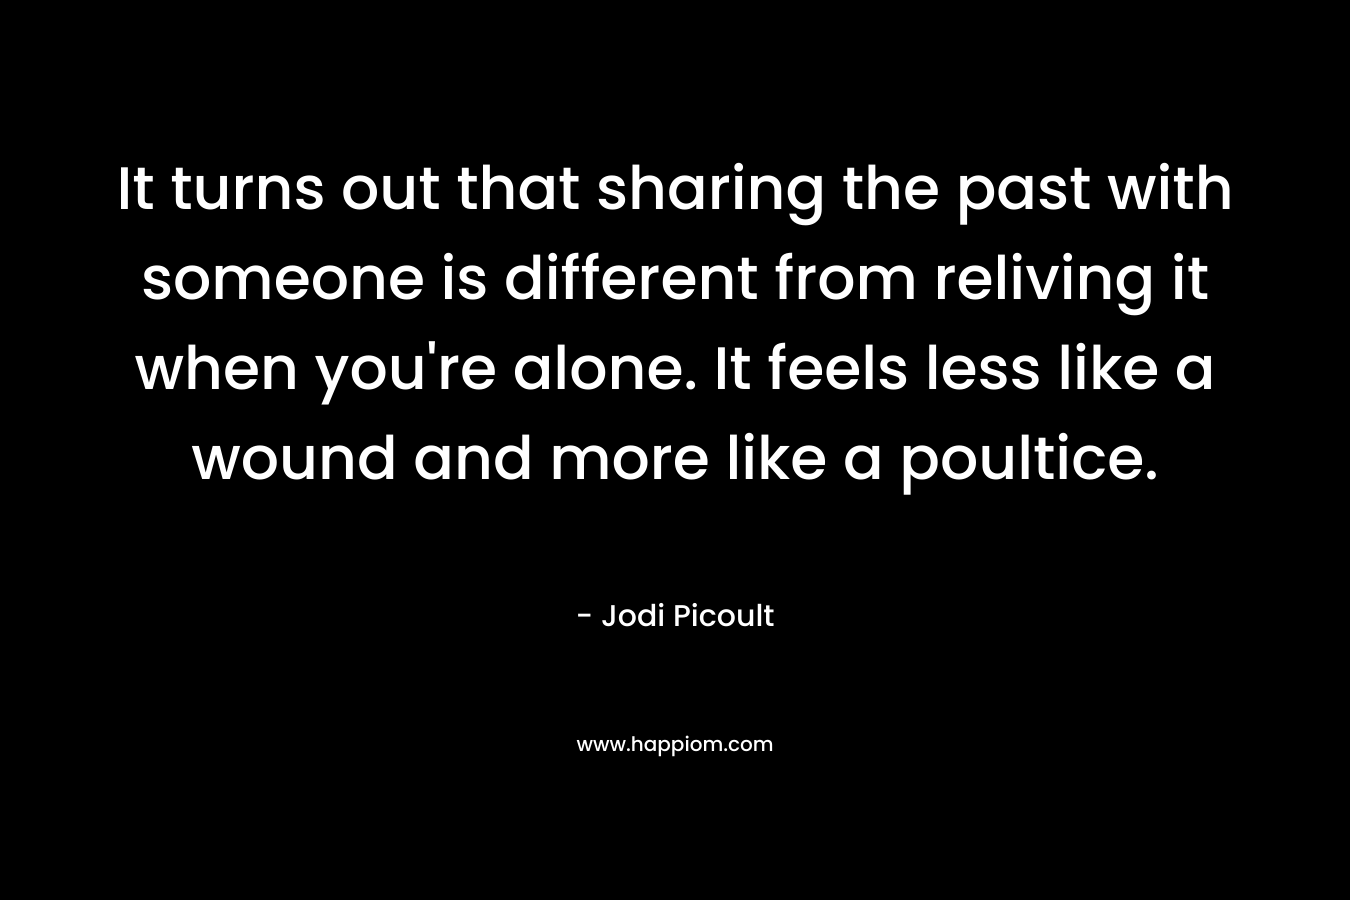 It turns out that sharing the past with someone is different from reliving it when you're alone. It feels less like a wound and more like a poultice.